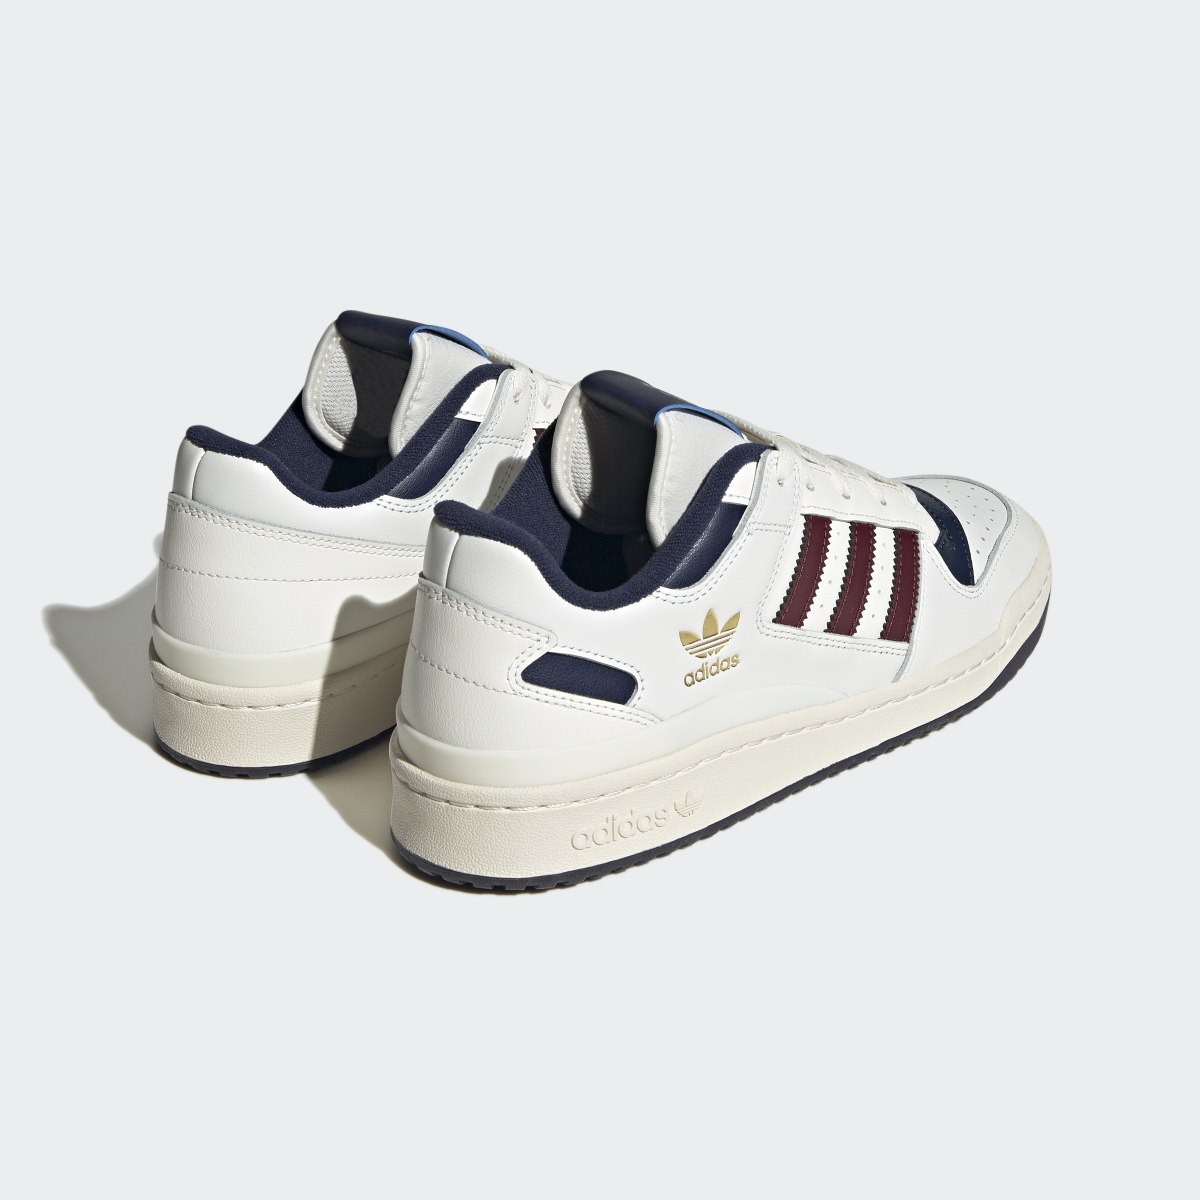 Adidas Chaussure Forum Low CL. 7